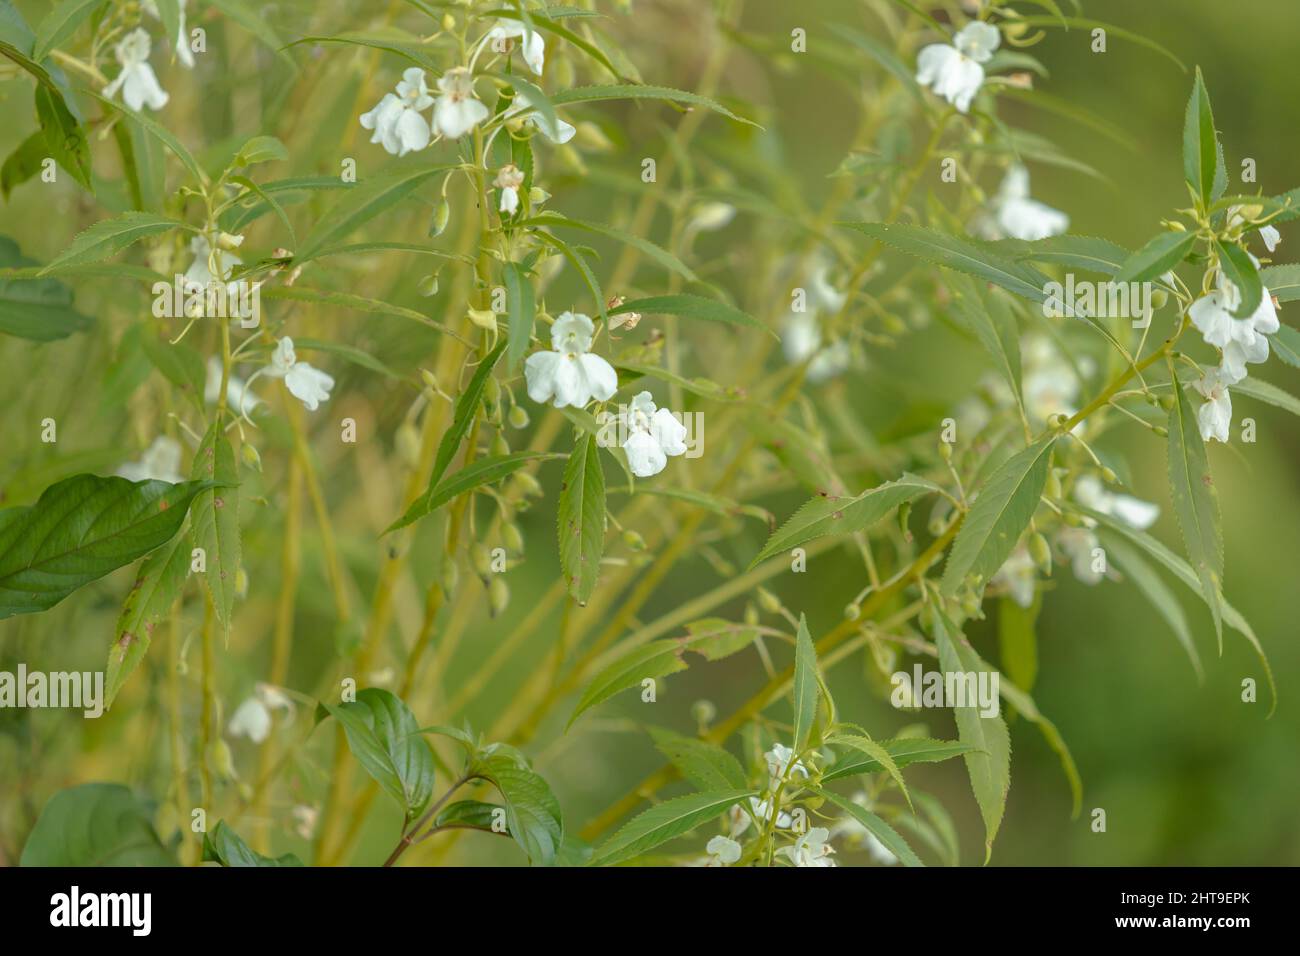 Closeup of garden balsam flowers blooming on the shrub Stock Photo